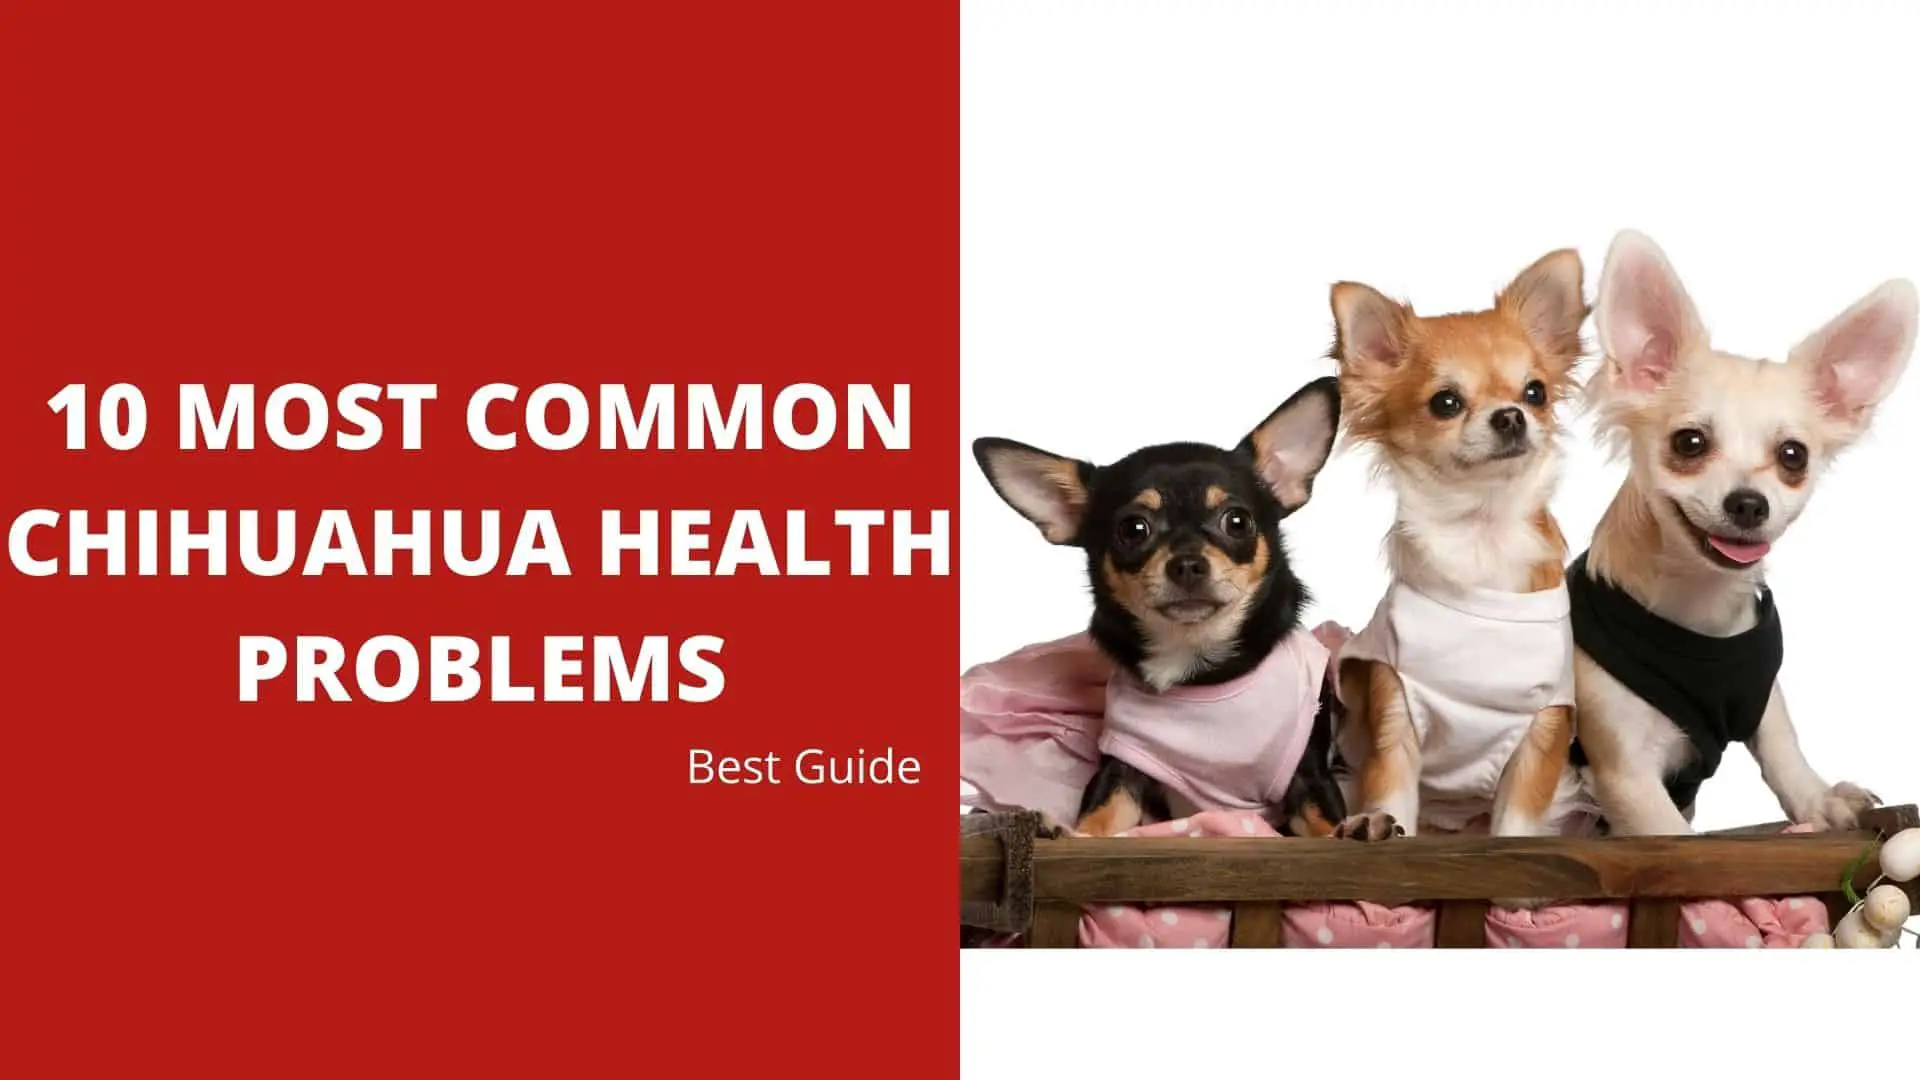 10 Most Common Chihuahua Health Problems Best Guide